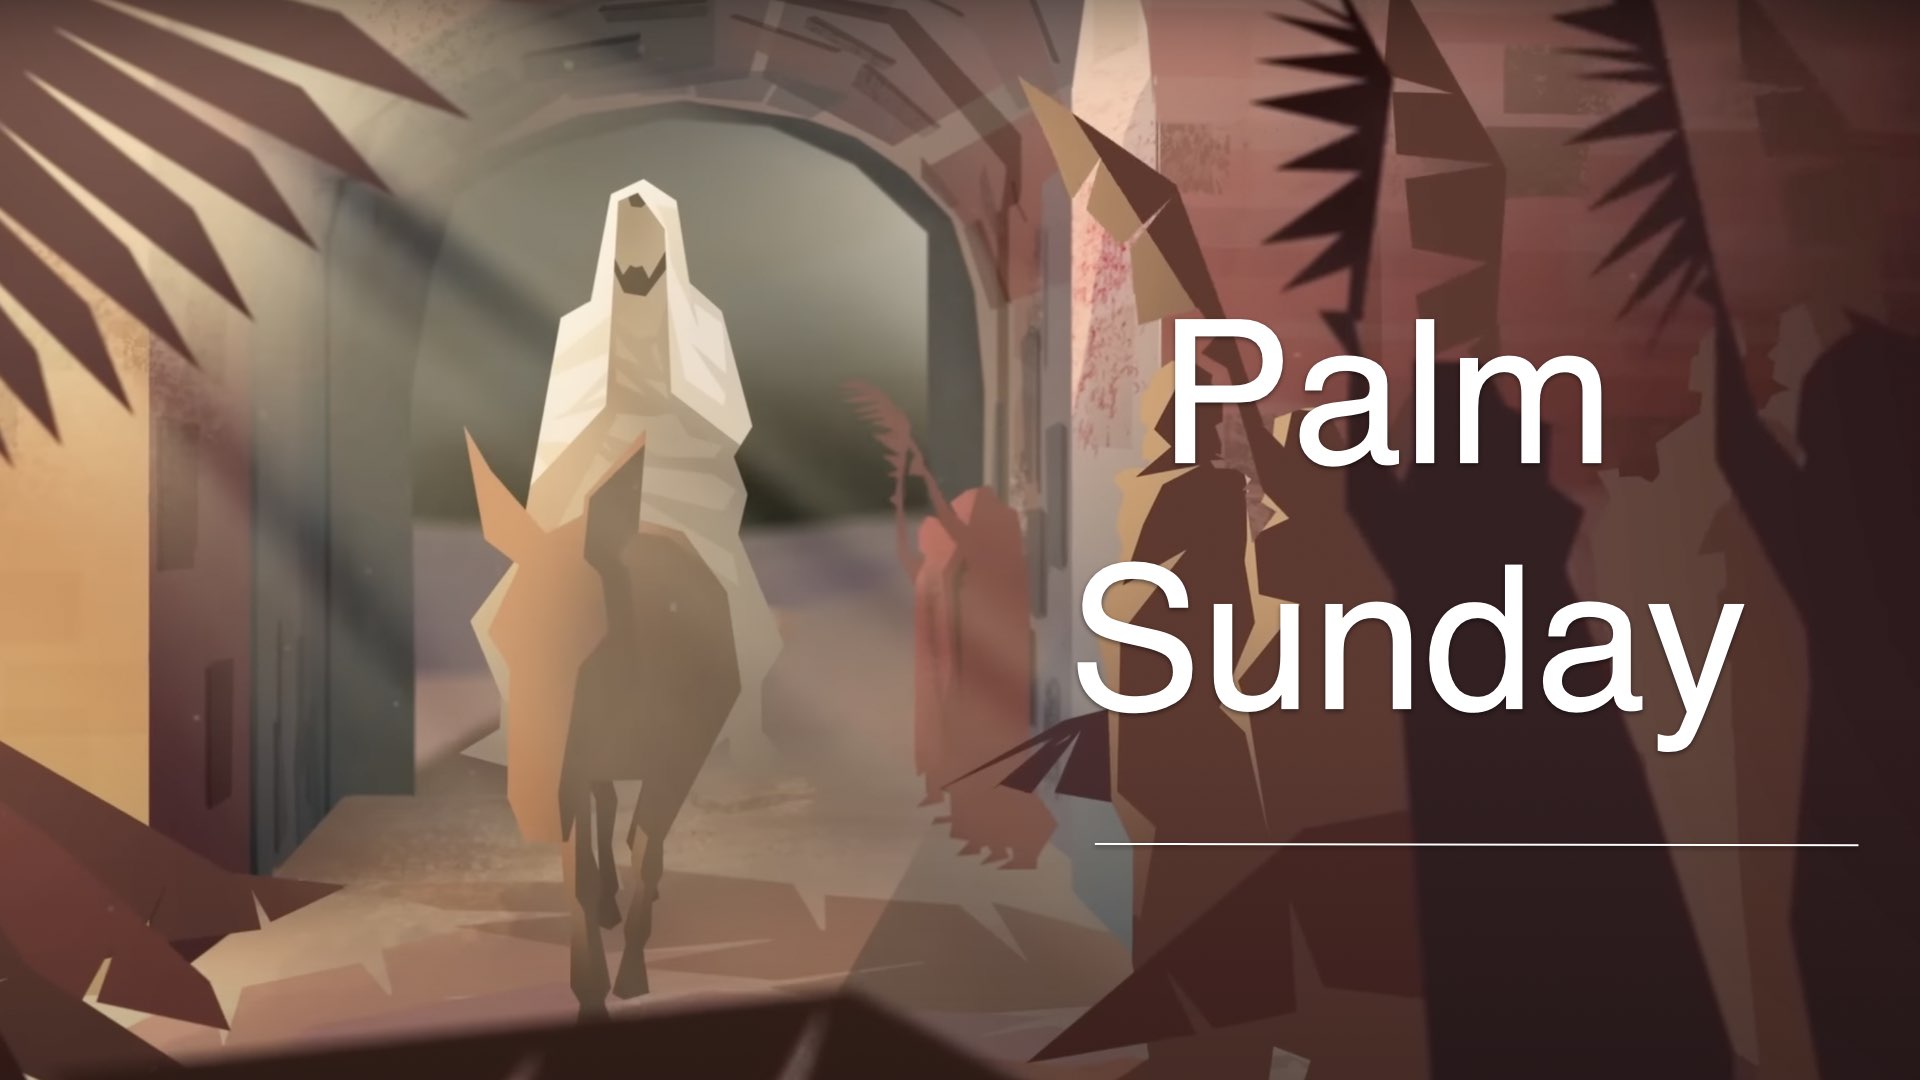 Palm Sunday: Your King Comes to You